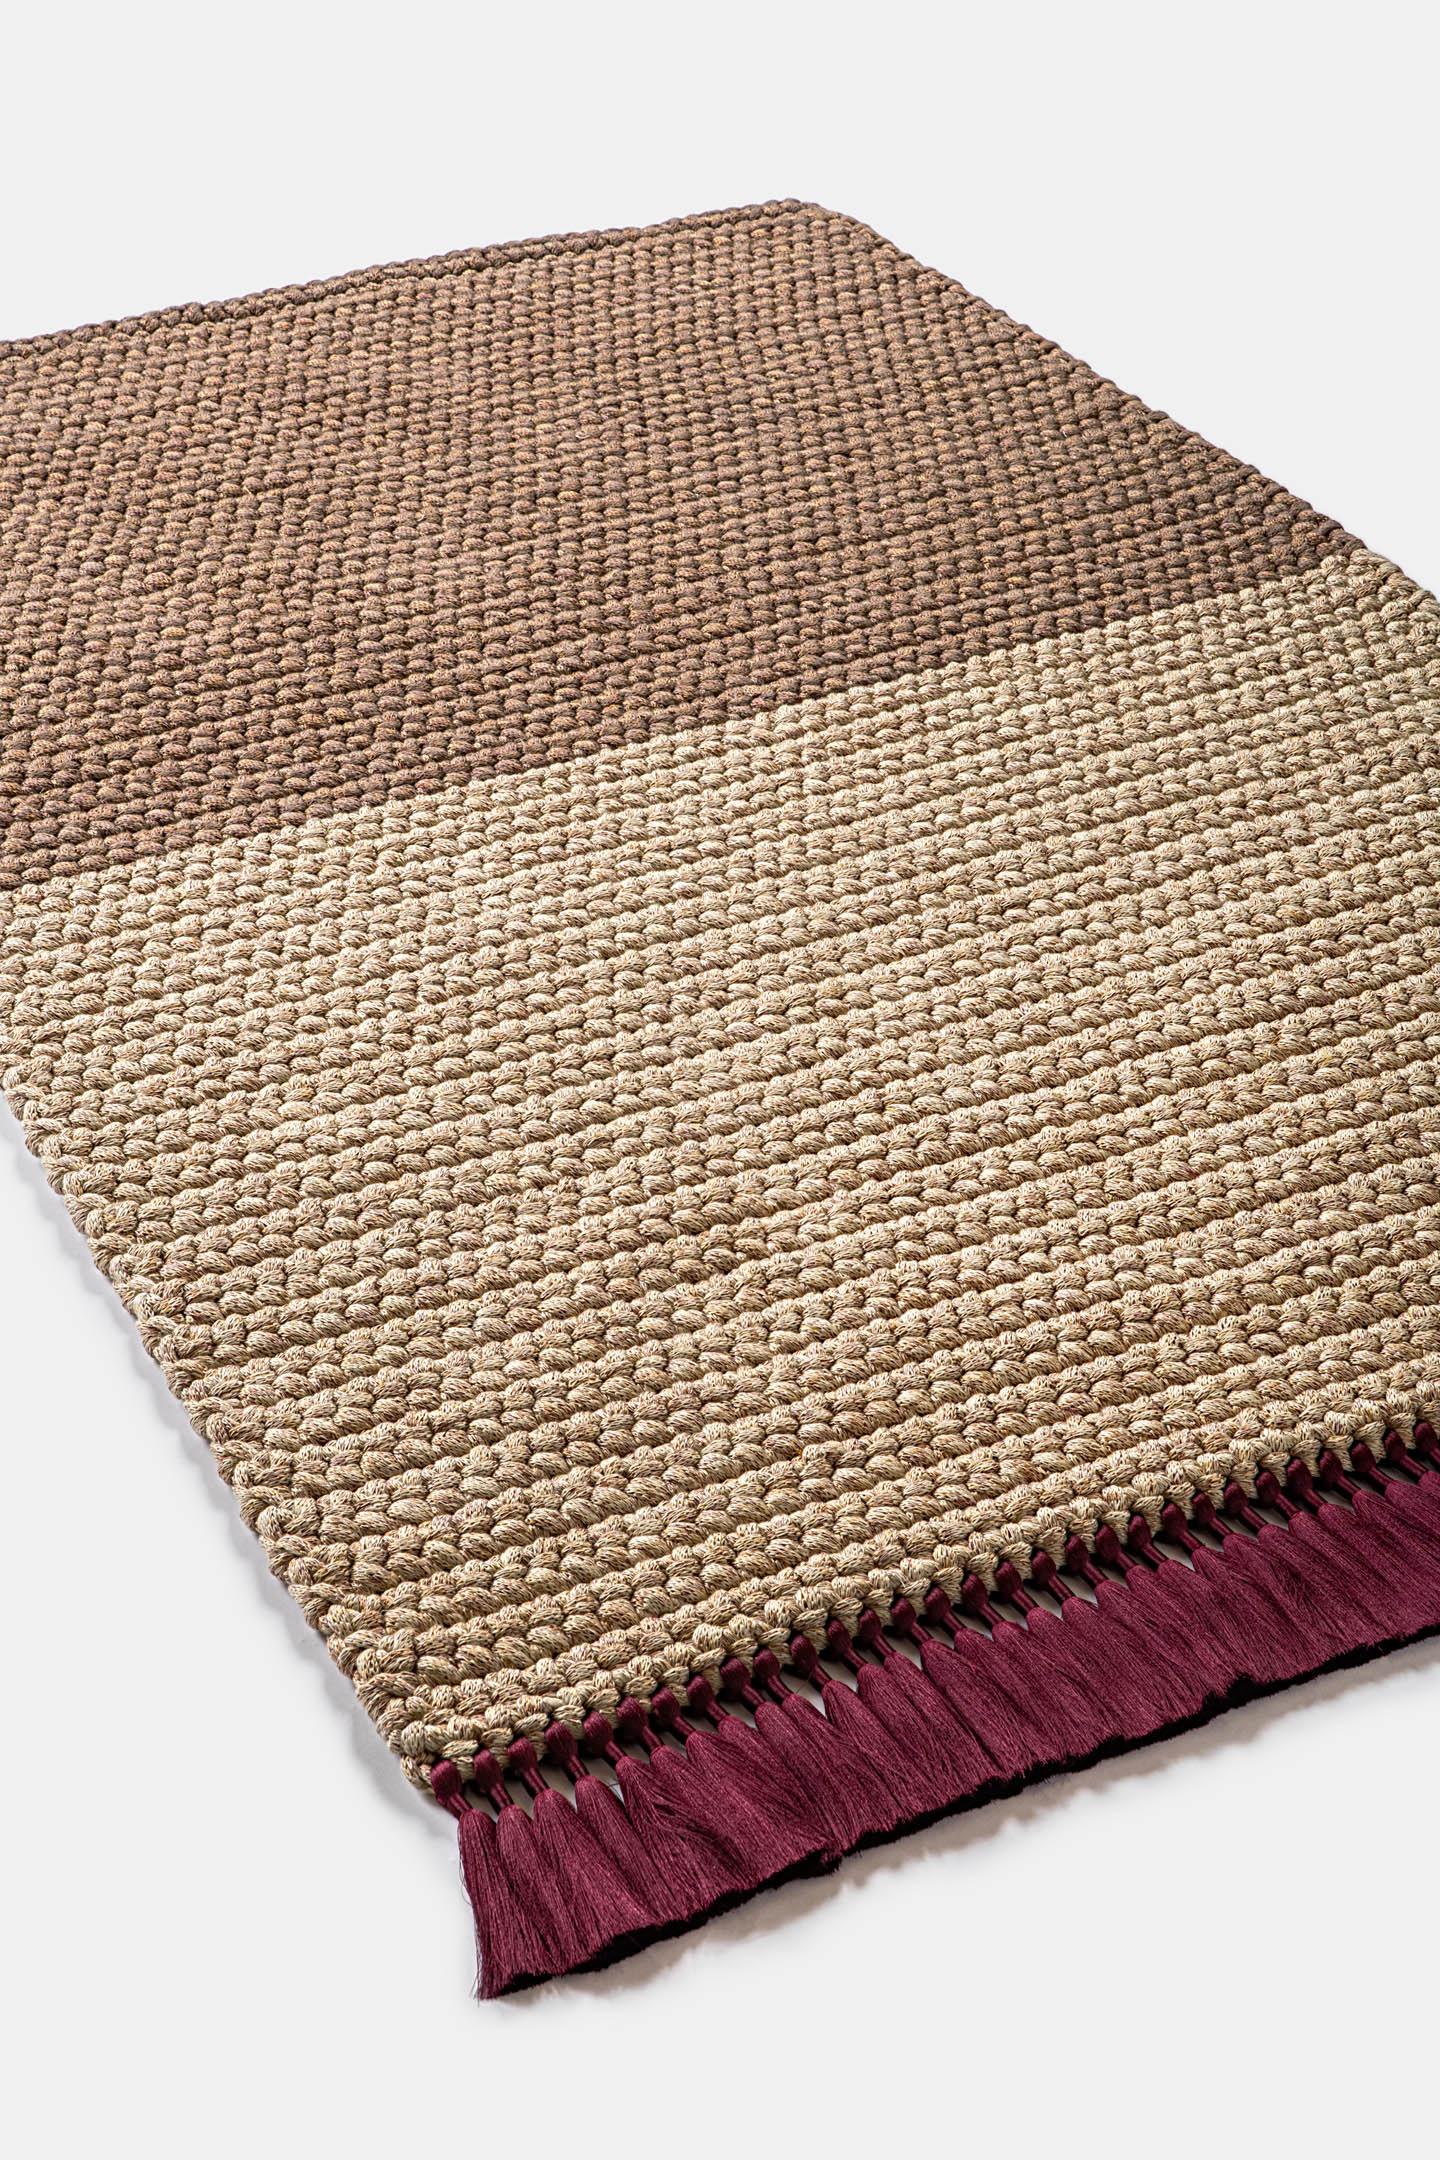 Handmade Crochet Two-Tone Rug in Beige Brown by iota In New Condition For Sale In Tel Aviv, IL